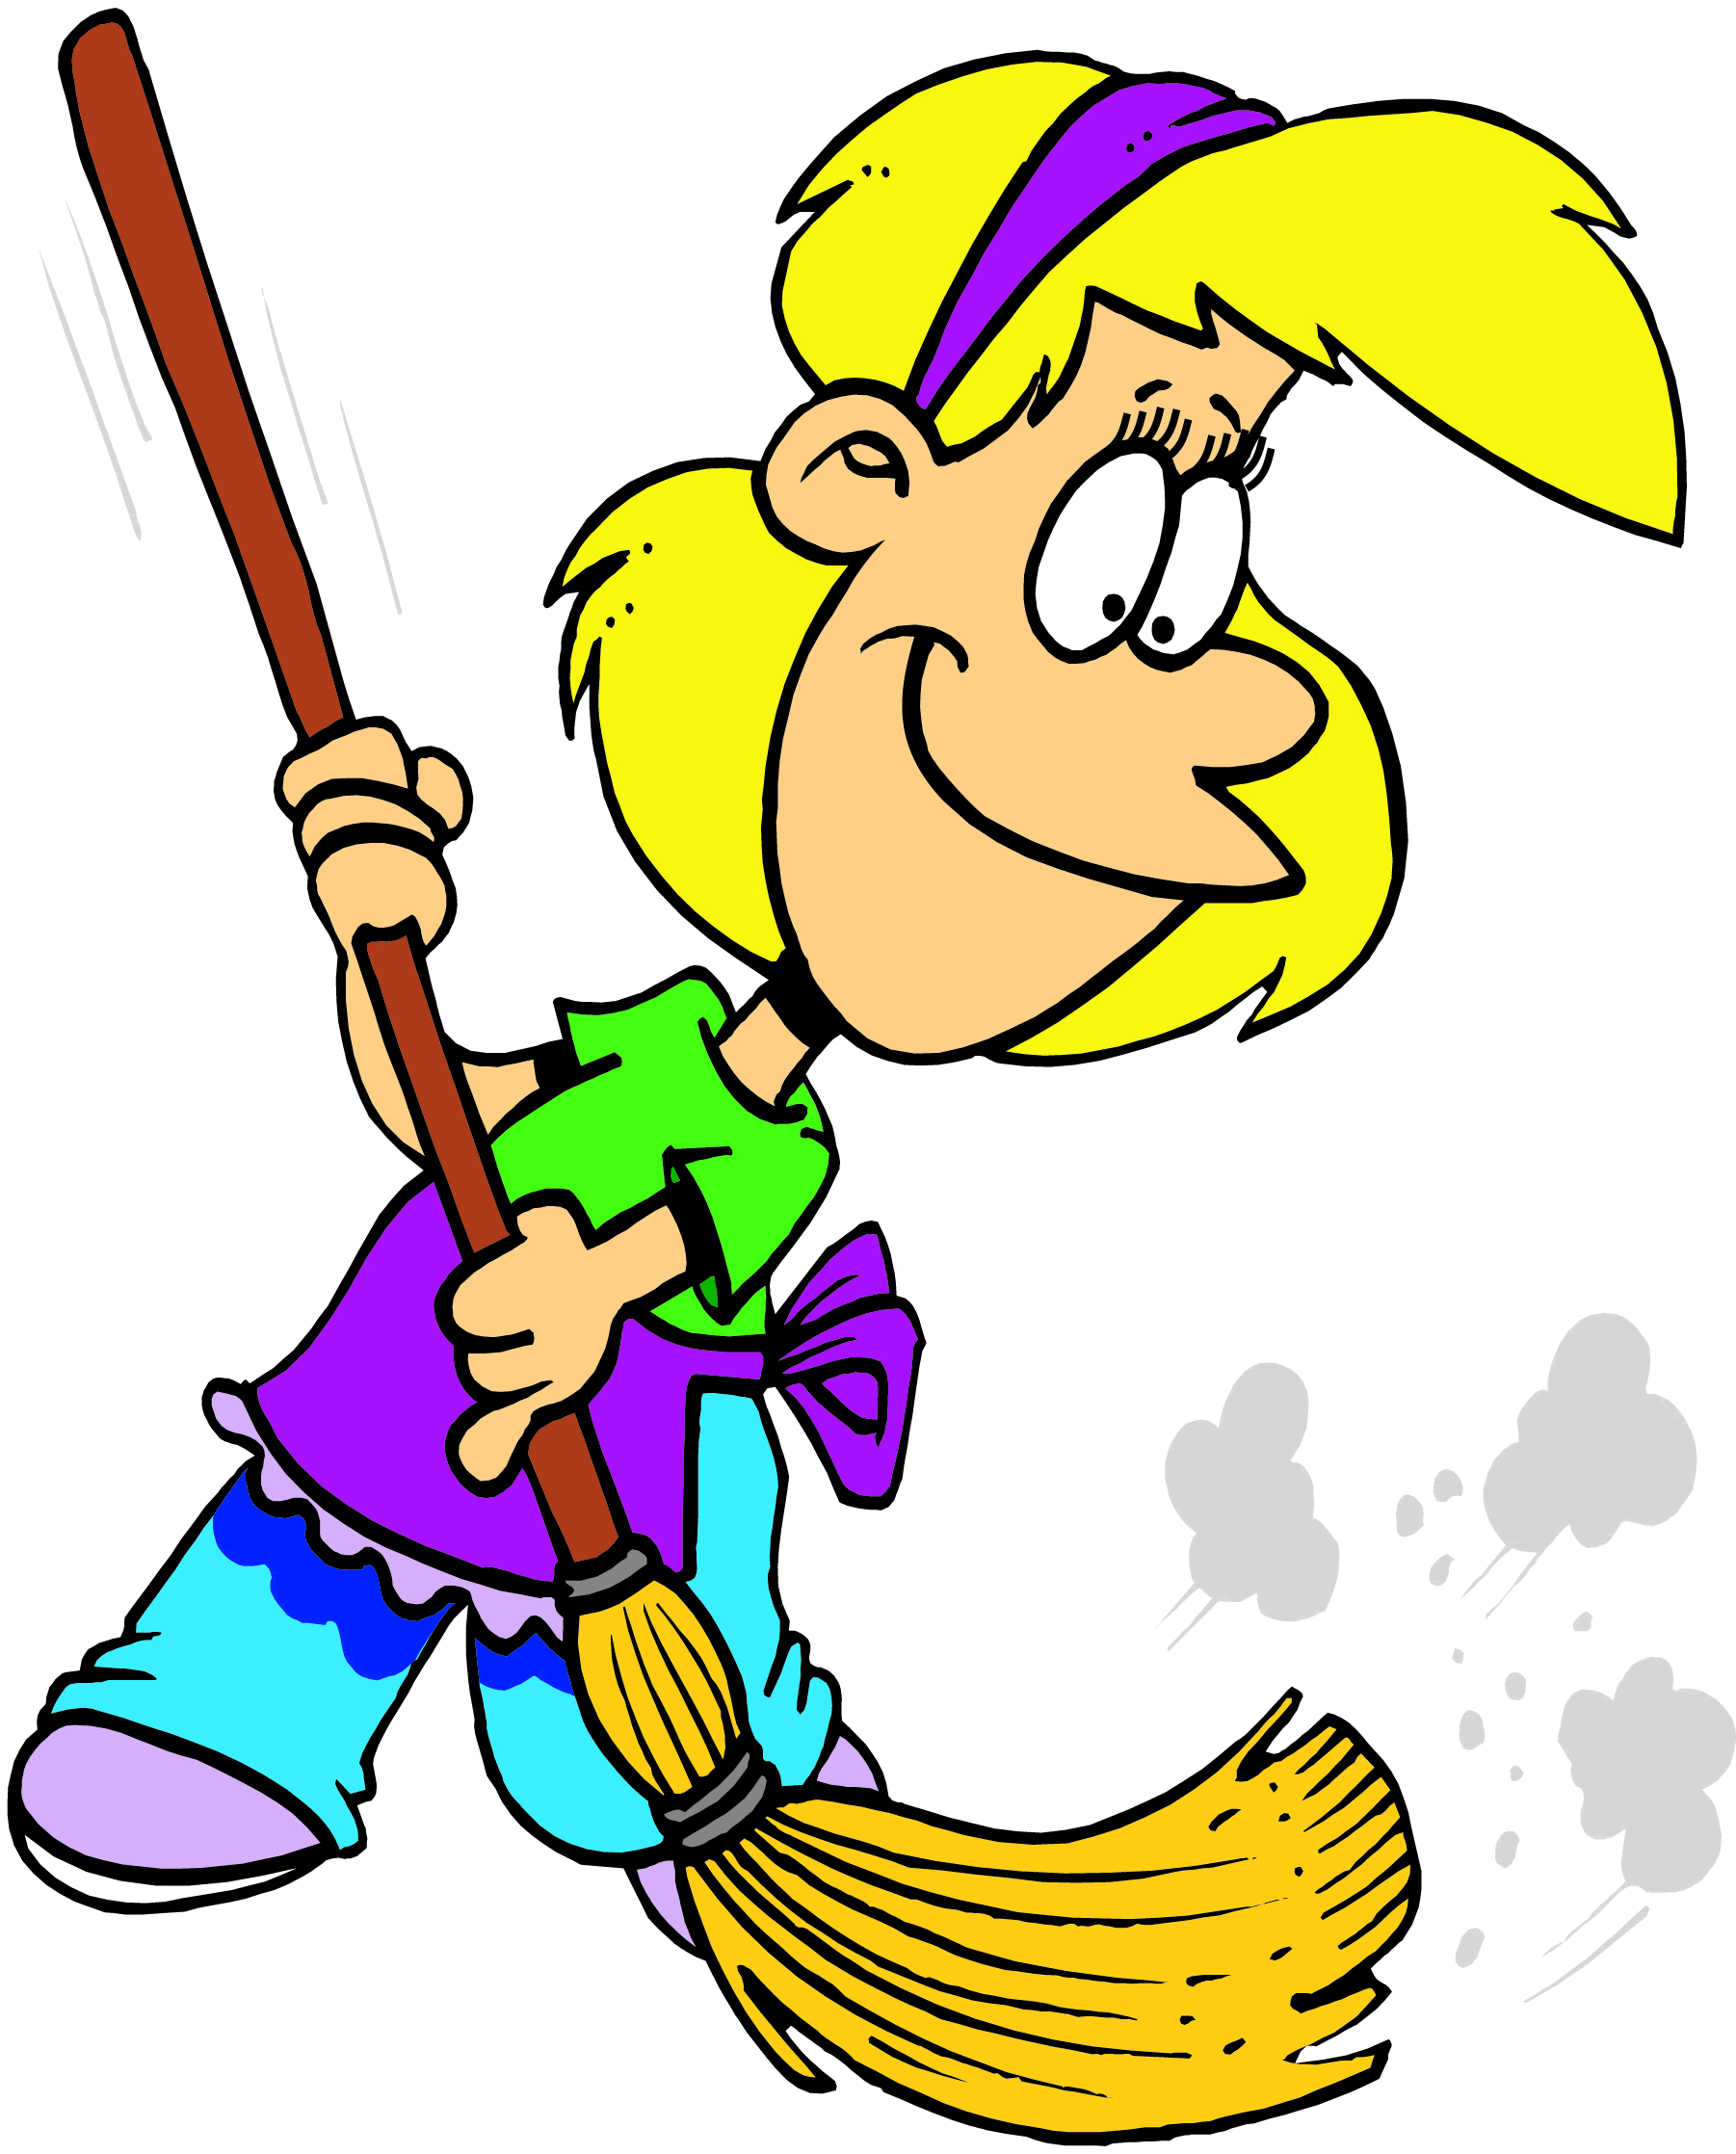 Free House Cleaning Images, Download Free House Cleaning Images png